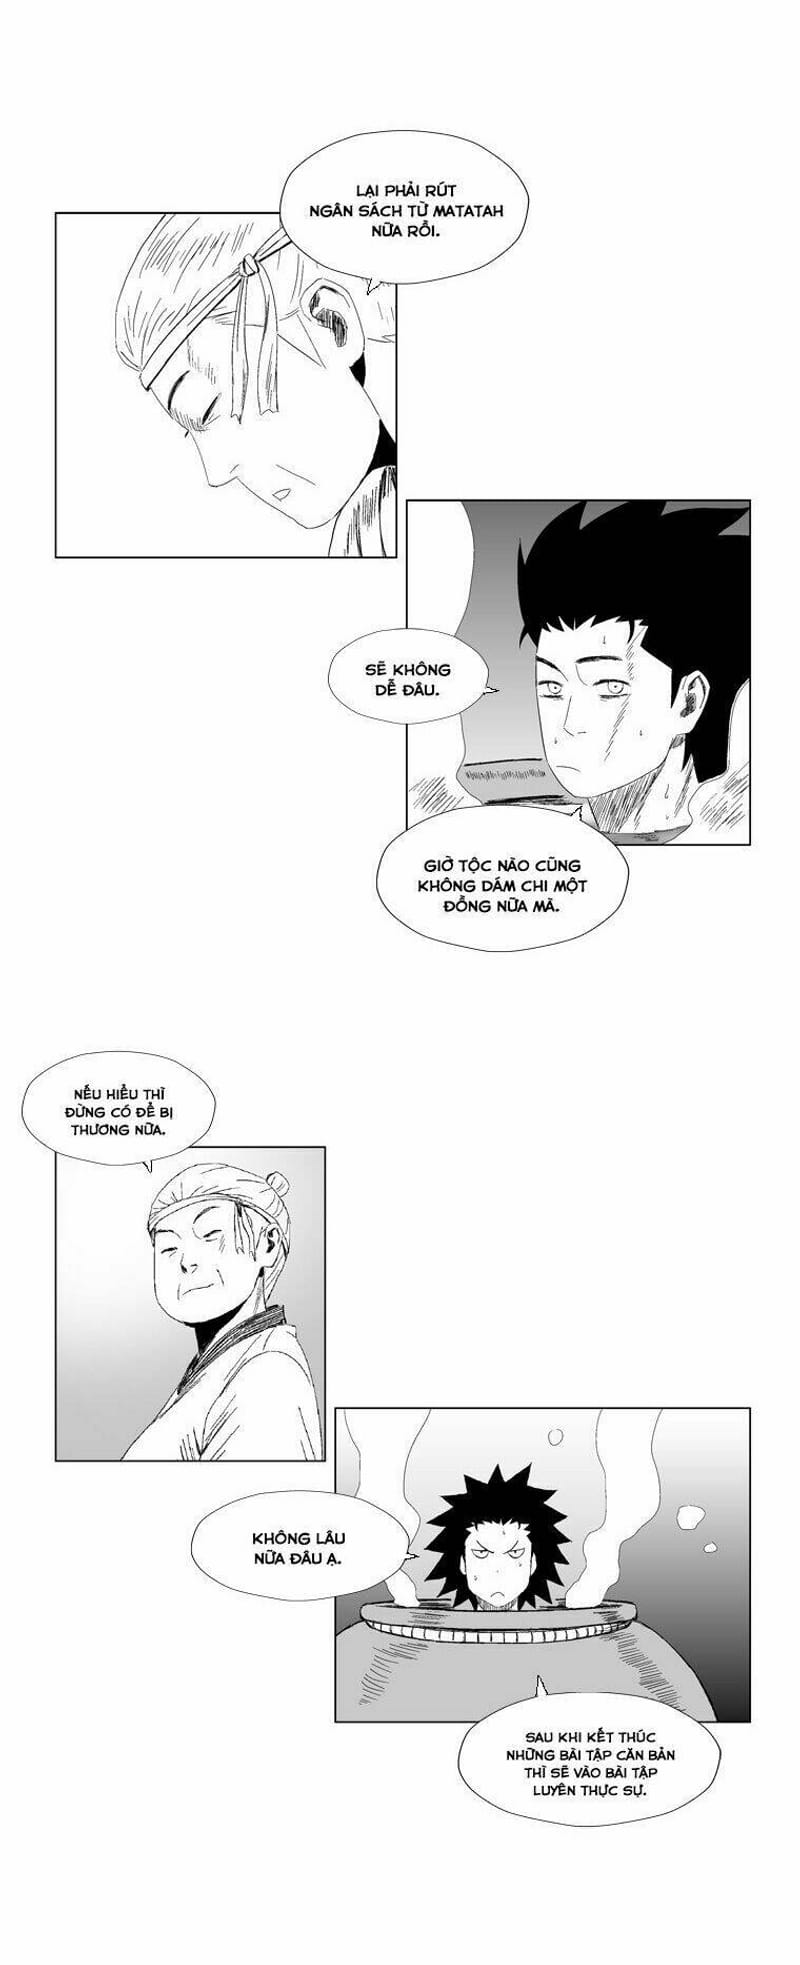 page_10